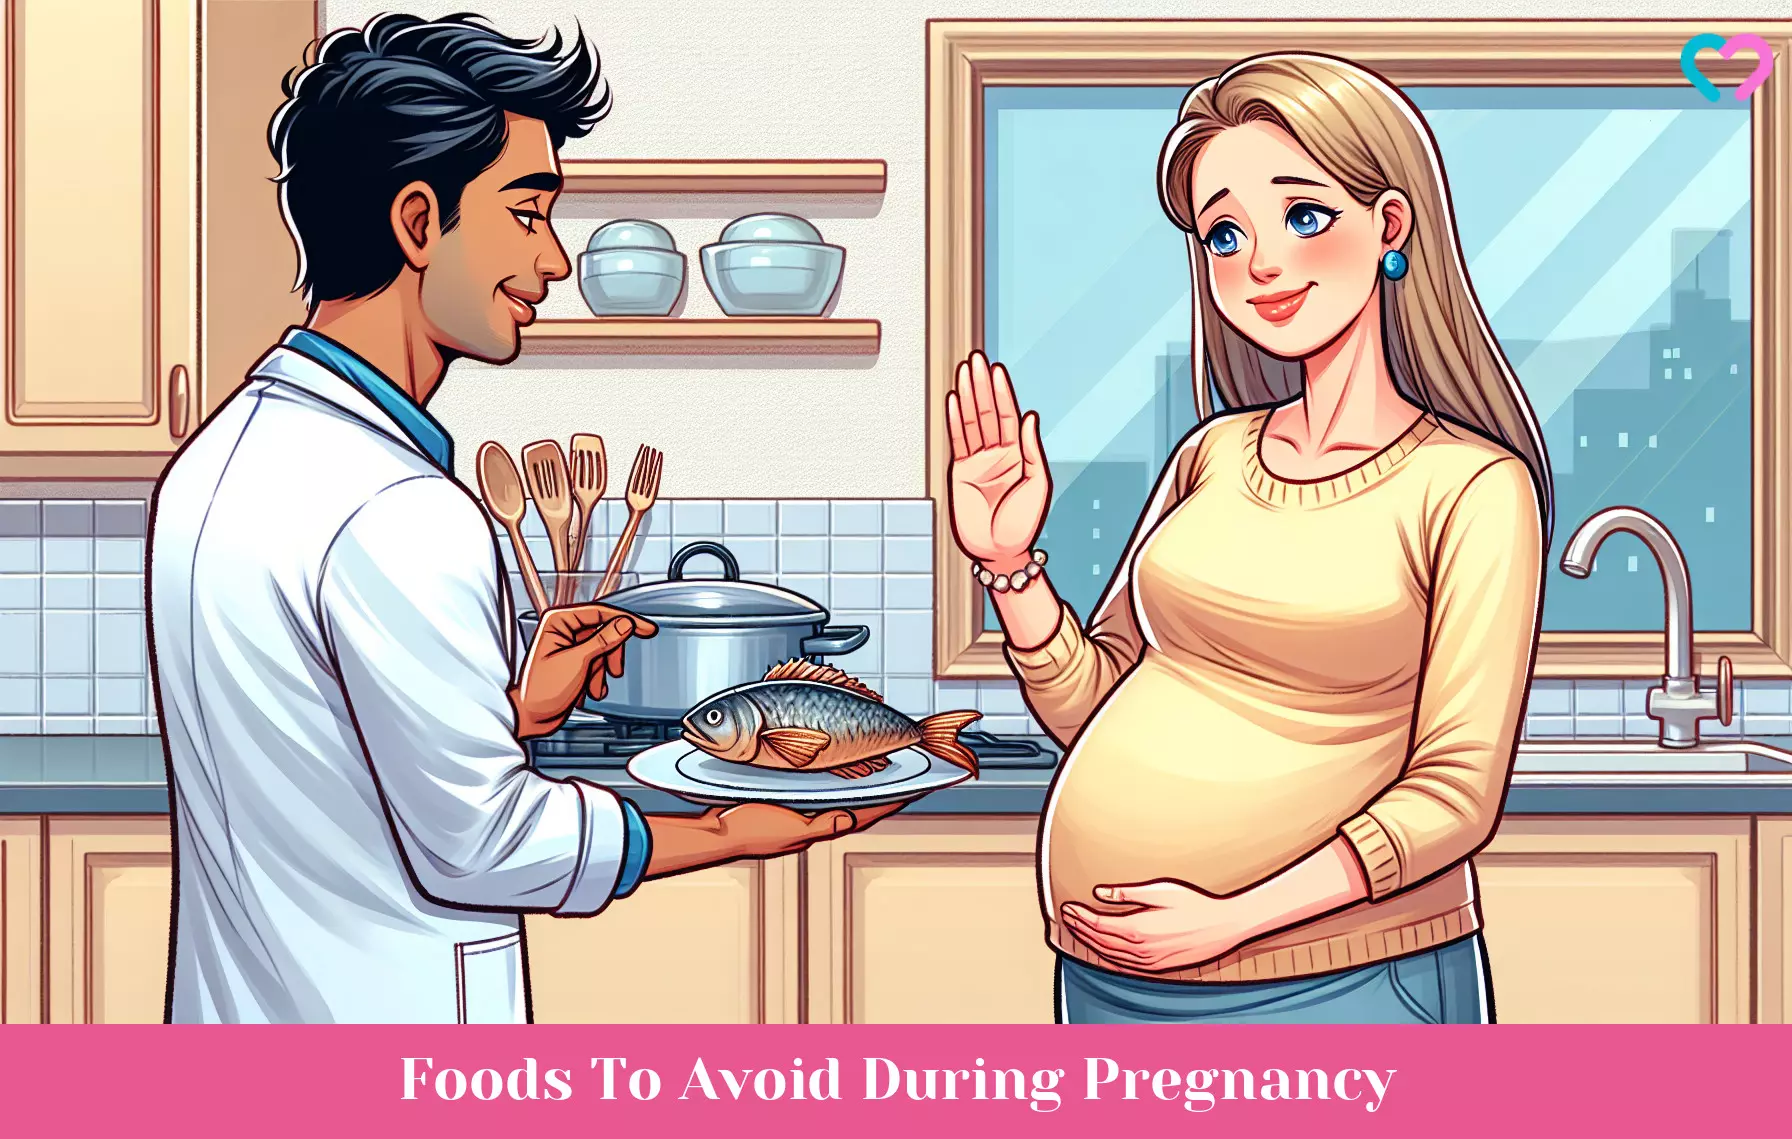 food to avoid during pregnancy_illustration